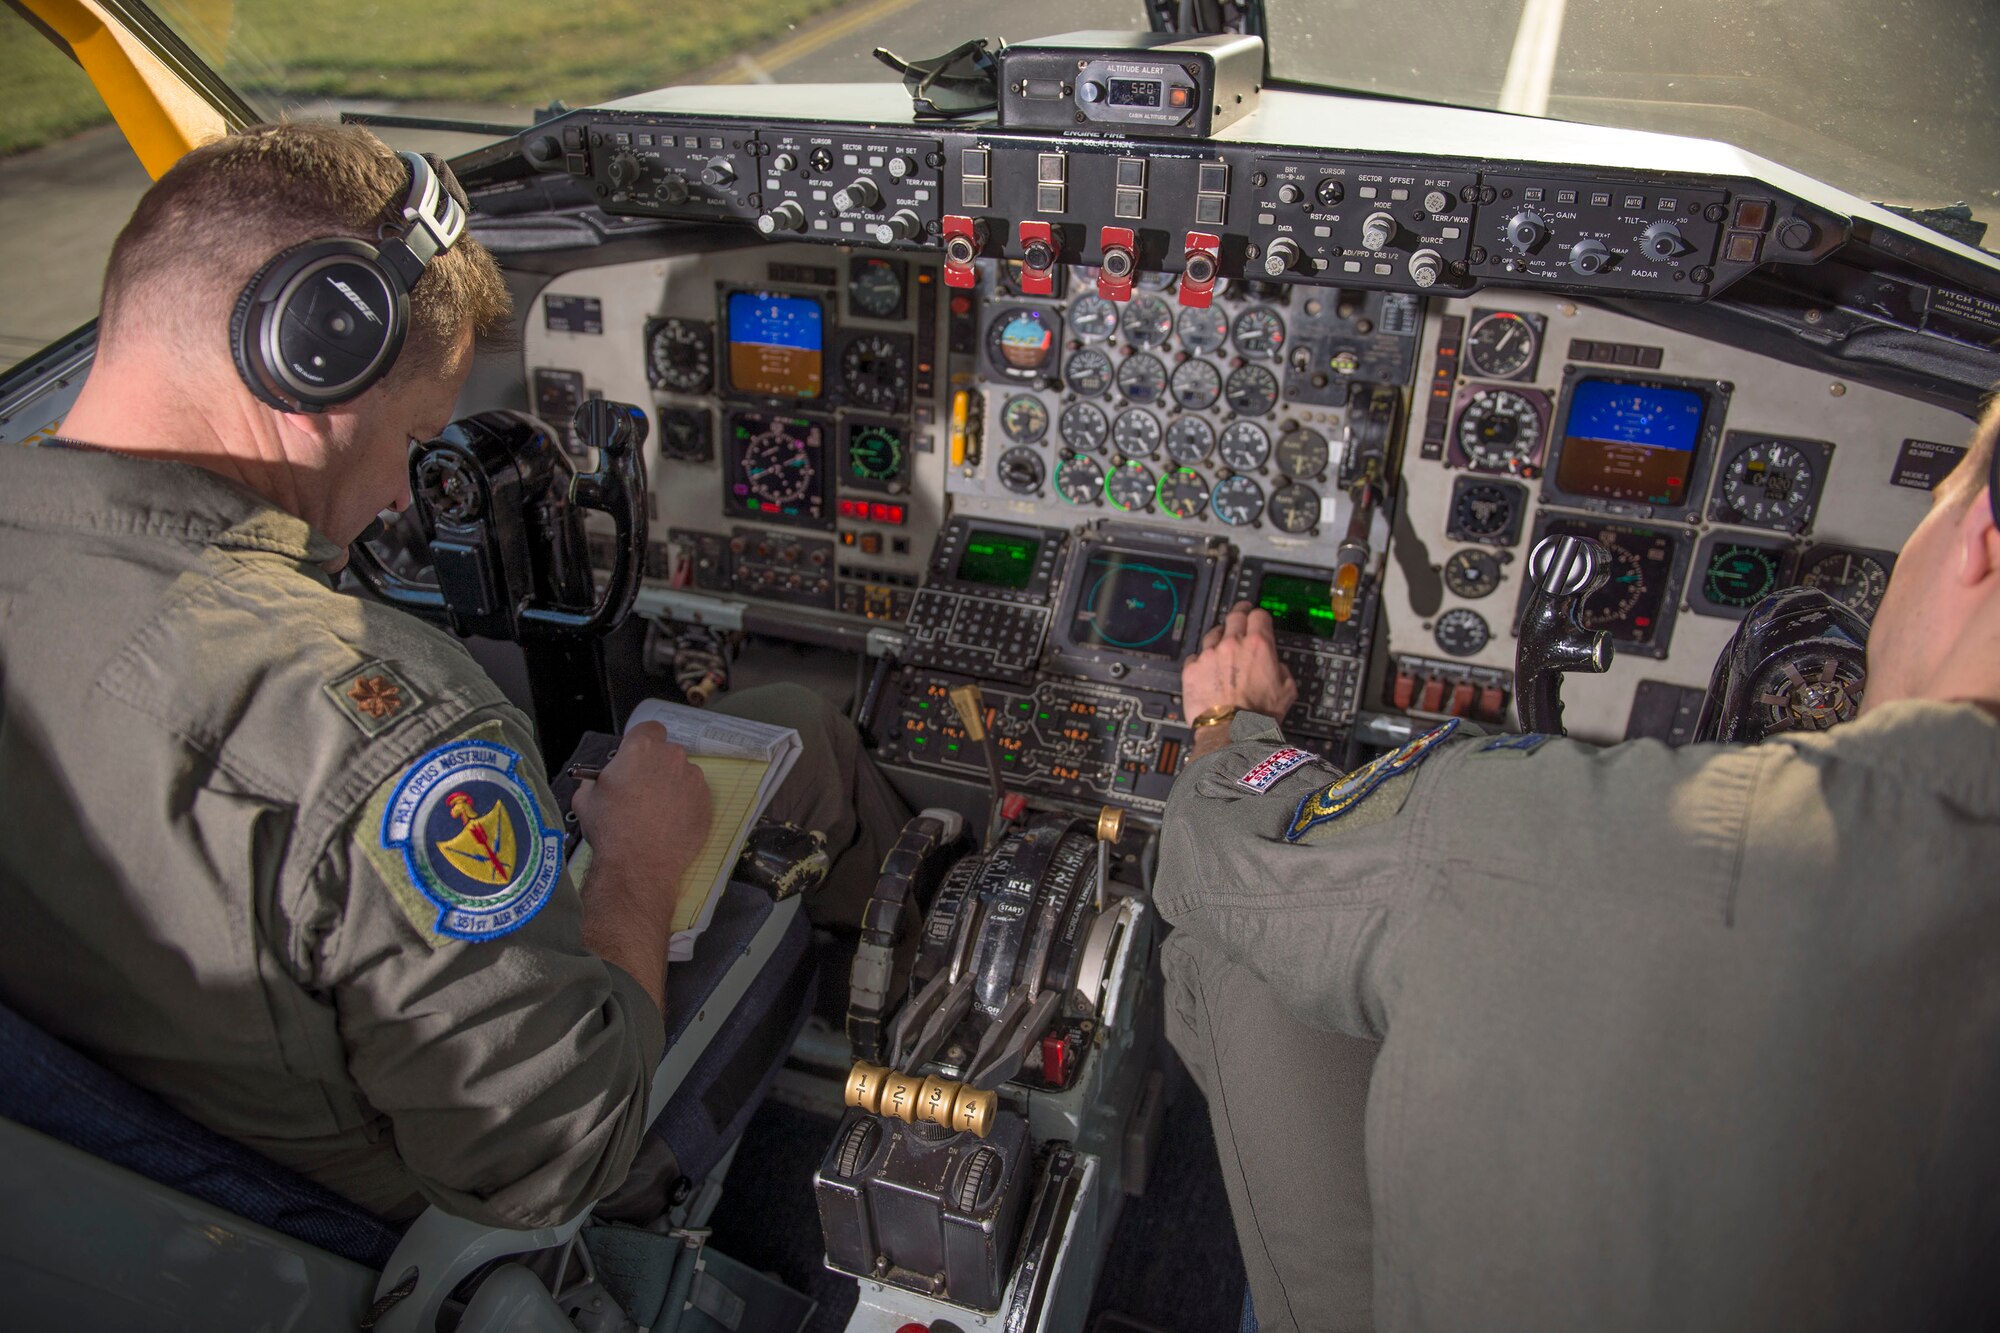 U.S. Air Force Maj. Steven Strasbaugh, and Capt. Zachary Overbey, 351st Air Refueling Squadron pilots, perform pre-flight checks on the KC-135 Stratotanker prior to a mission for a large forces exercise, at RAF Mildenhall, England, Oct. 10, 2018. RAF Lakenheath hosted a large forces exercise that included F-22 Raptors from Joint Base Langley-Eustis, Va., F-15E Strike Eagles from RAF Lakenheath and F/A-18 Super Hornets from the Carrier Air Wing from USS Harry S. Truman (CVN-75). (U.S. Air Force photo by Staff Sgt. Christine Groening)